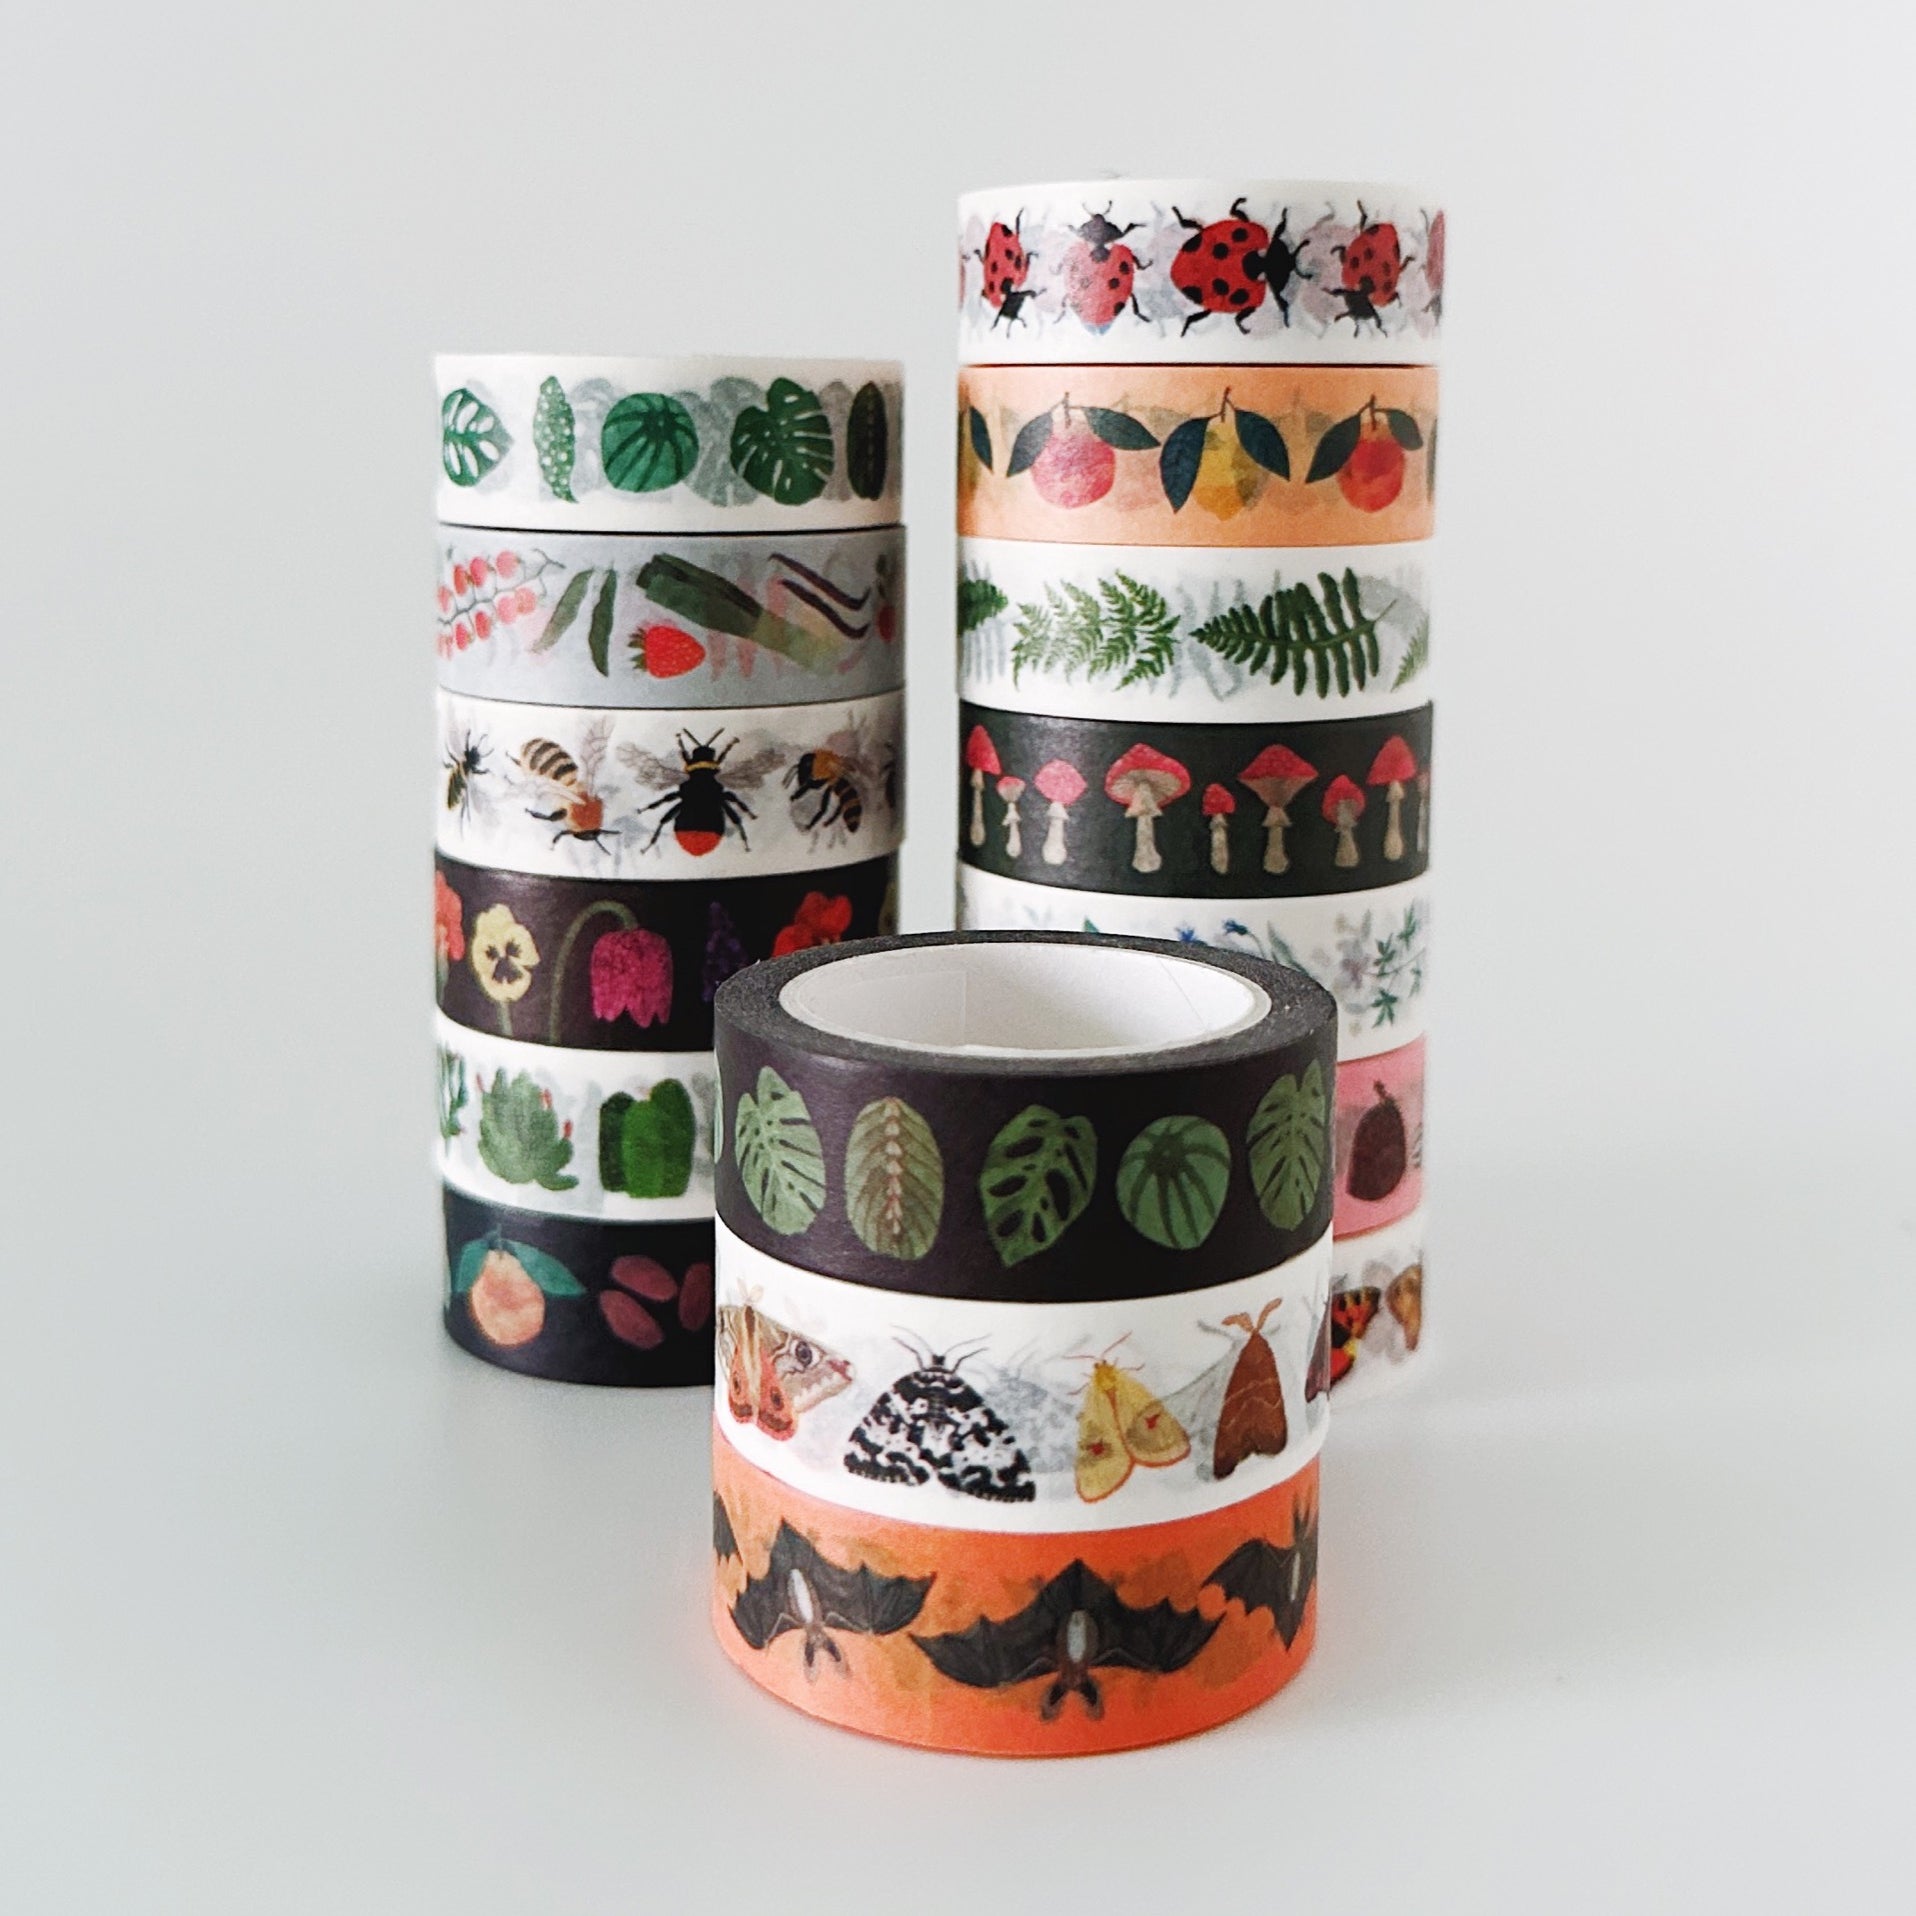 New washi tape designs and 5 reasons why they are brilliant